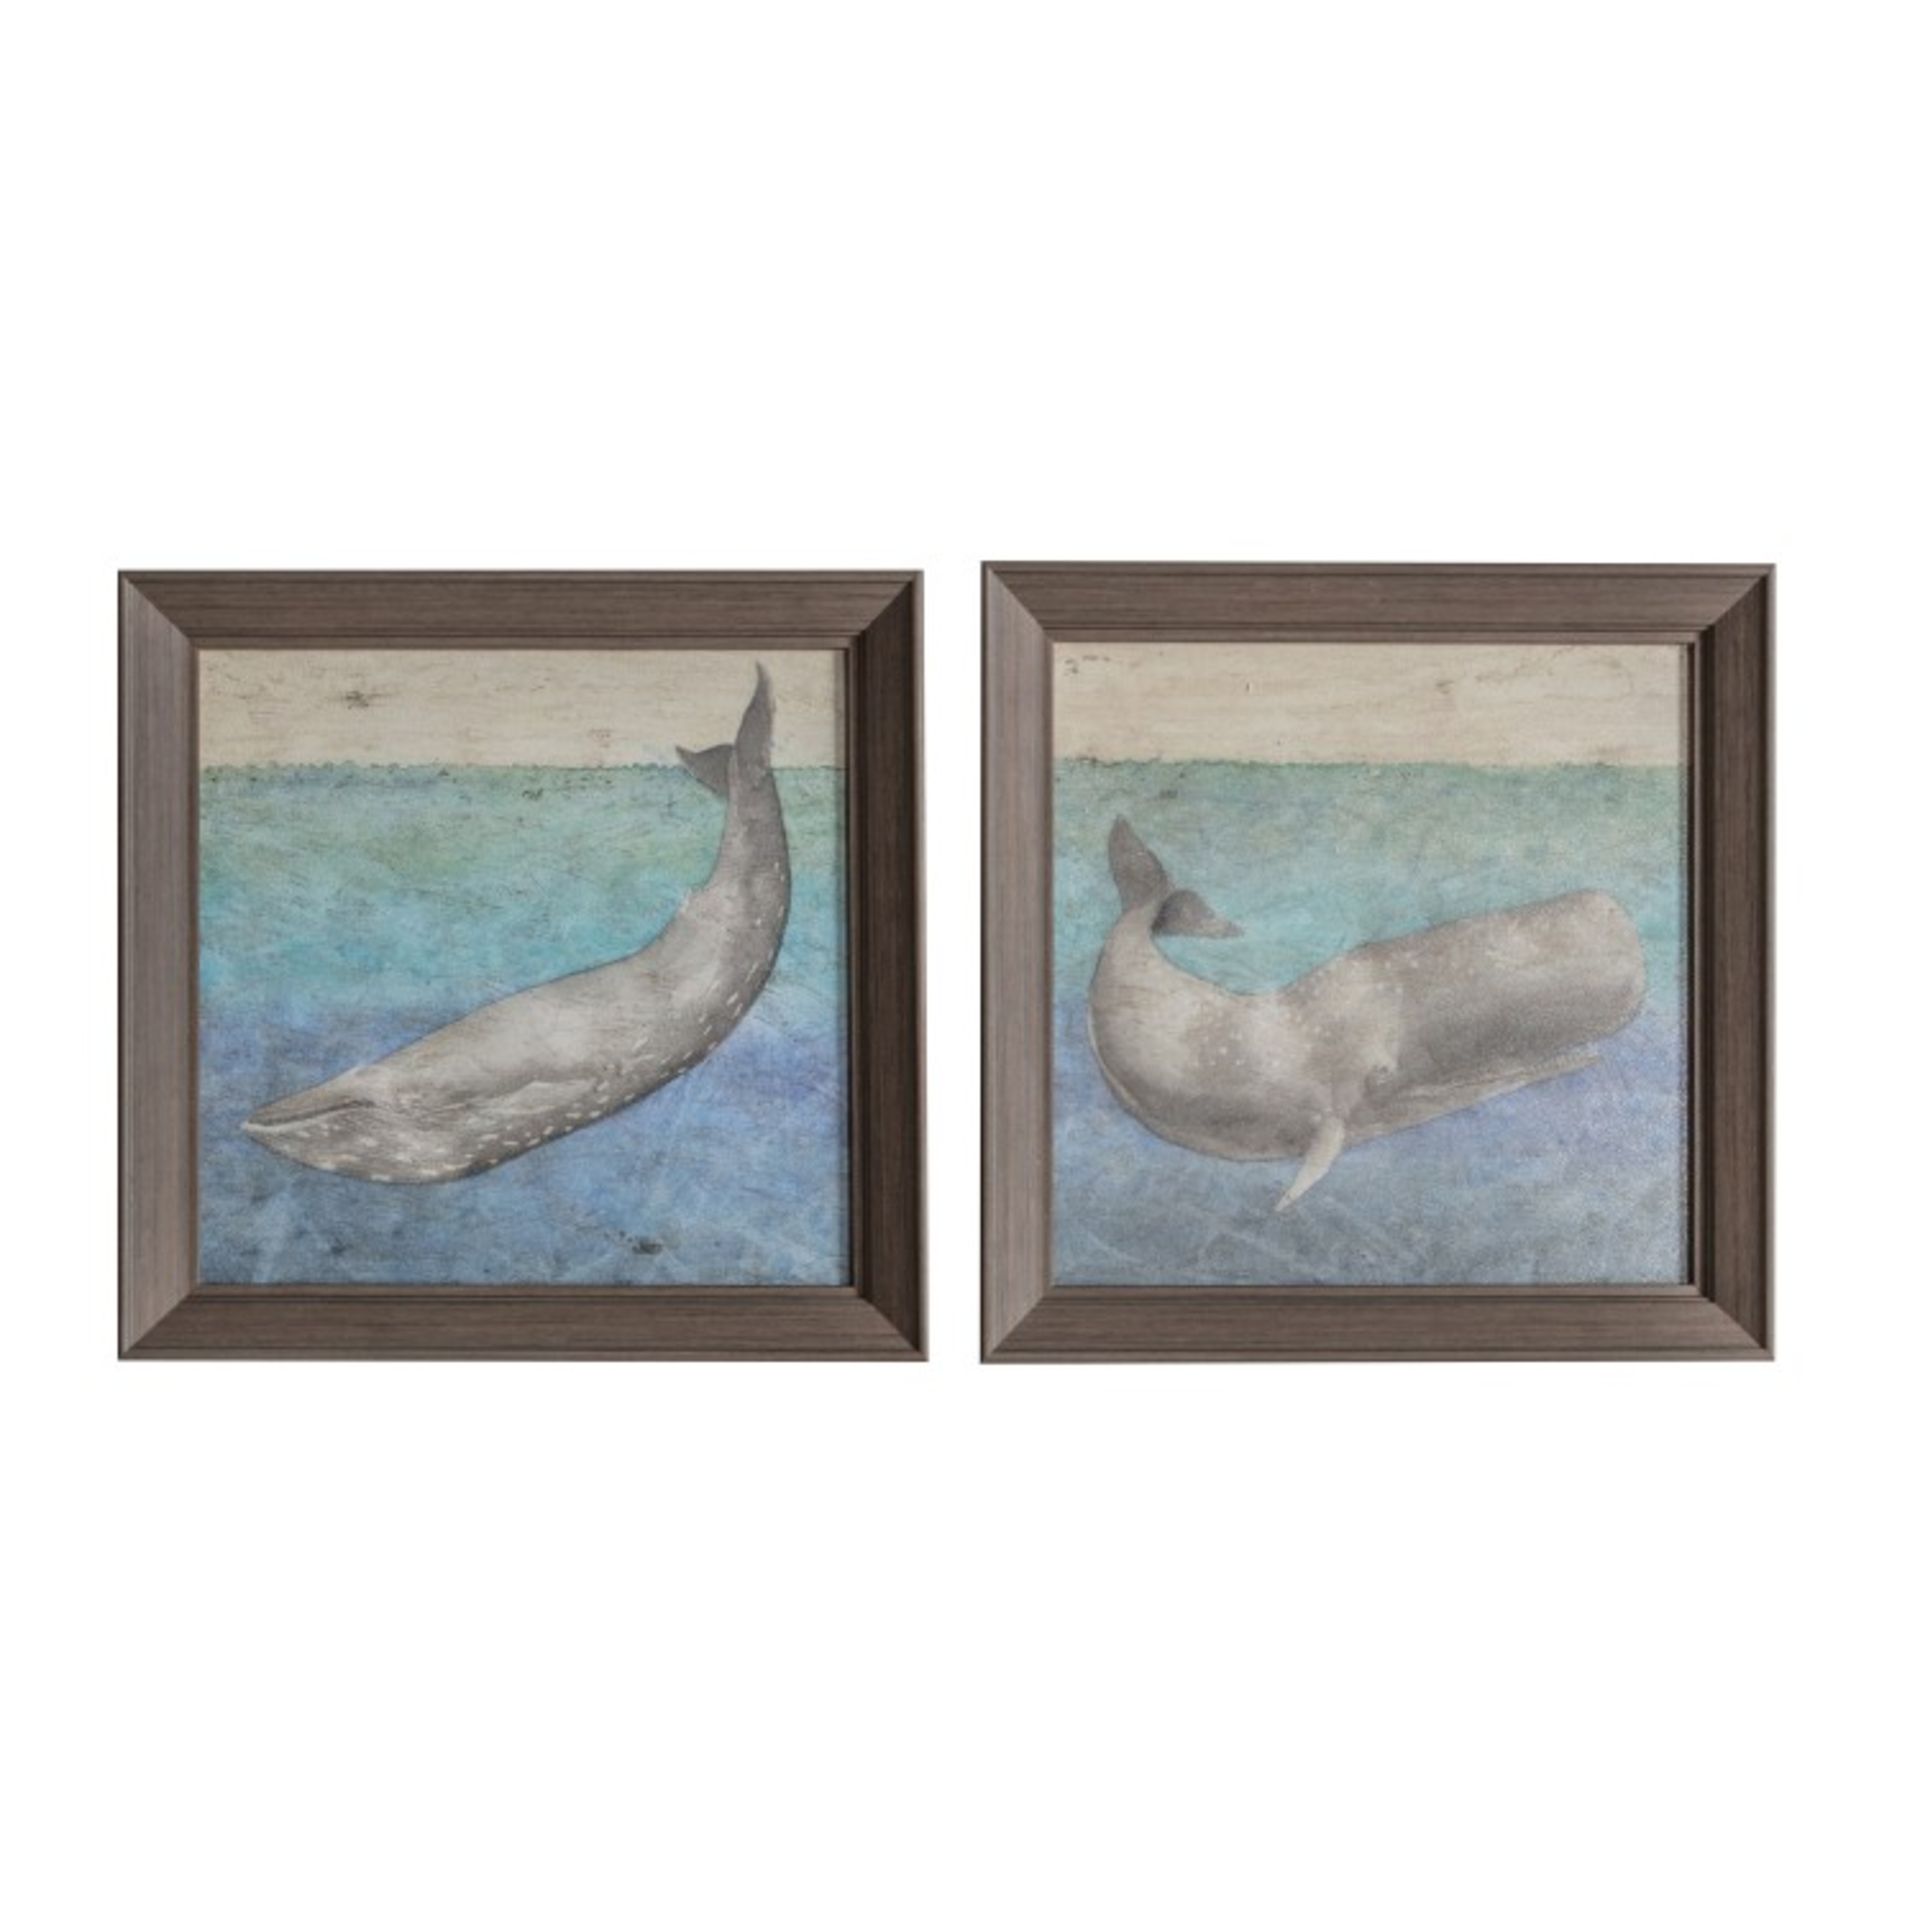 Textured whale framed art Set of 2 355 x 35 x 355mm A beautiful piece of wall art fresh and